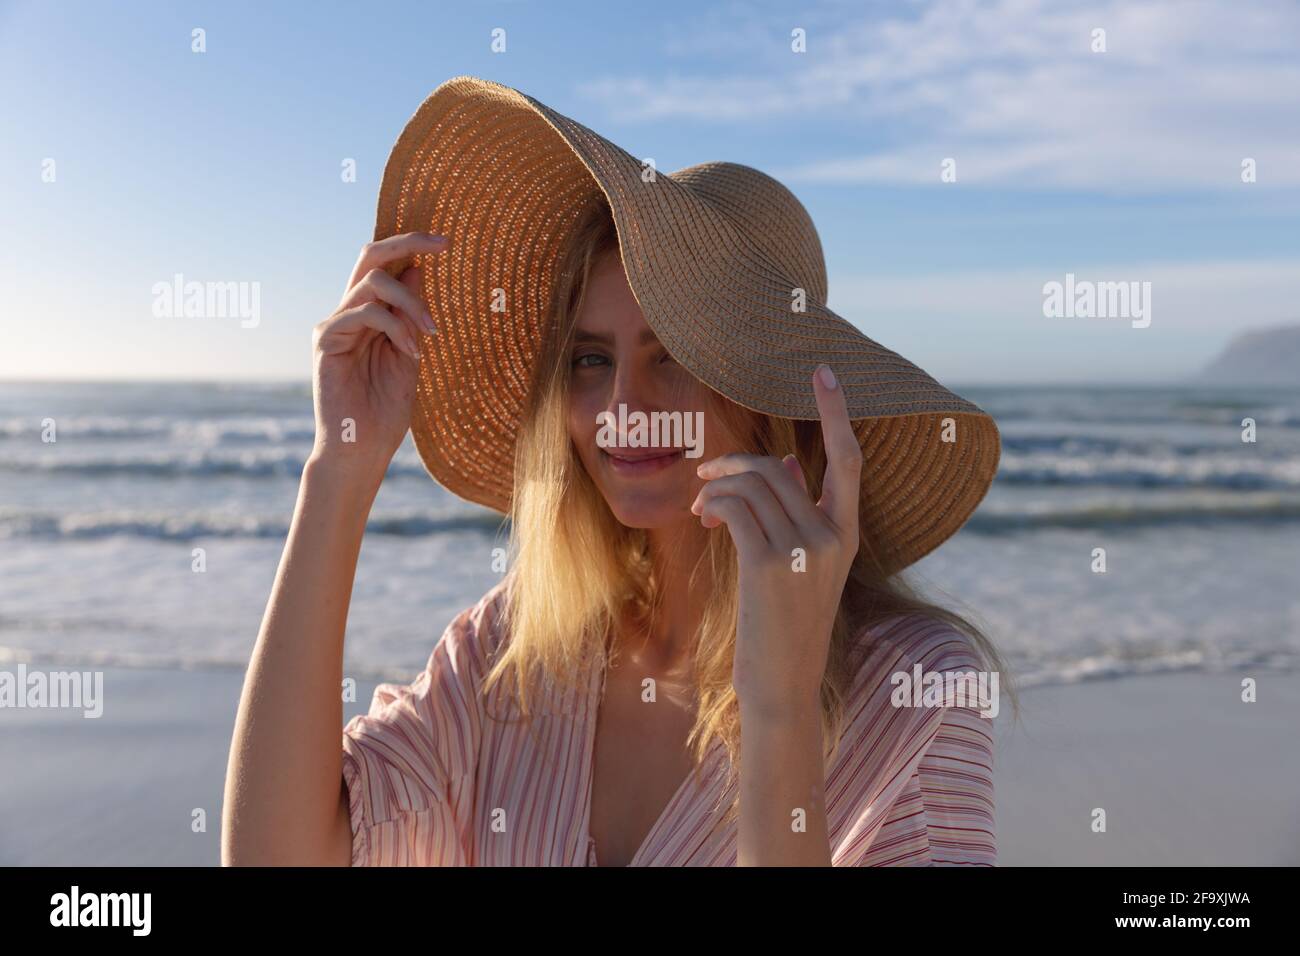 Caucasian woman wearing hat looking at camera and smiling at the beach Stock Photo